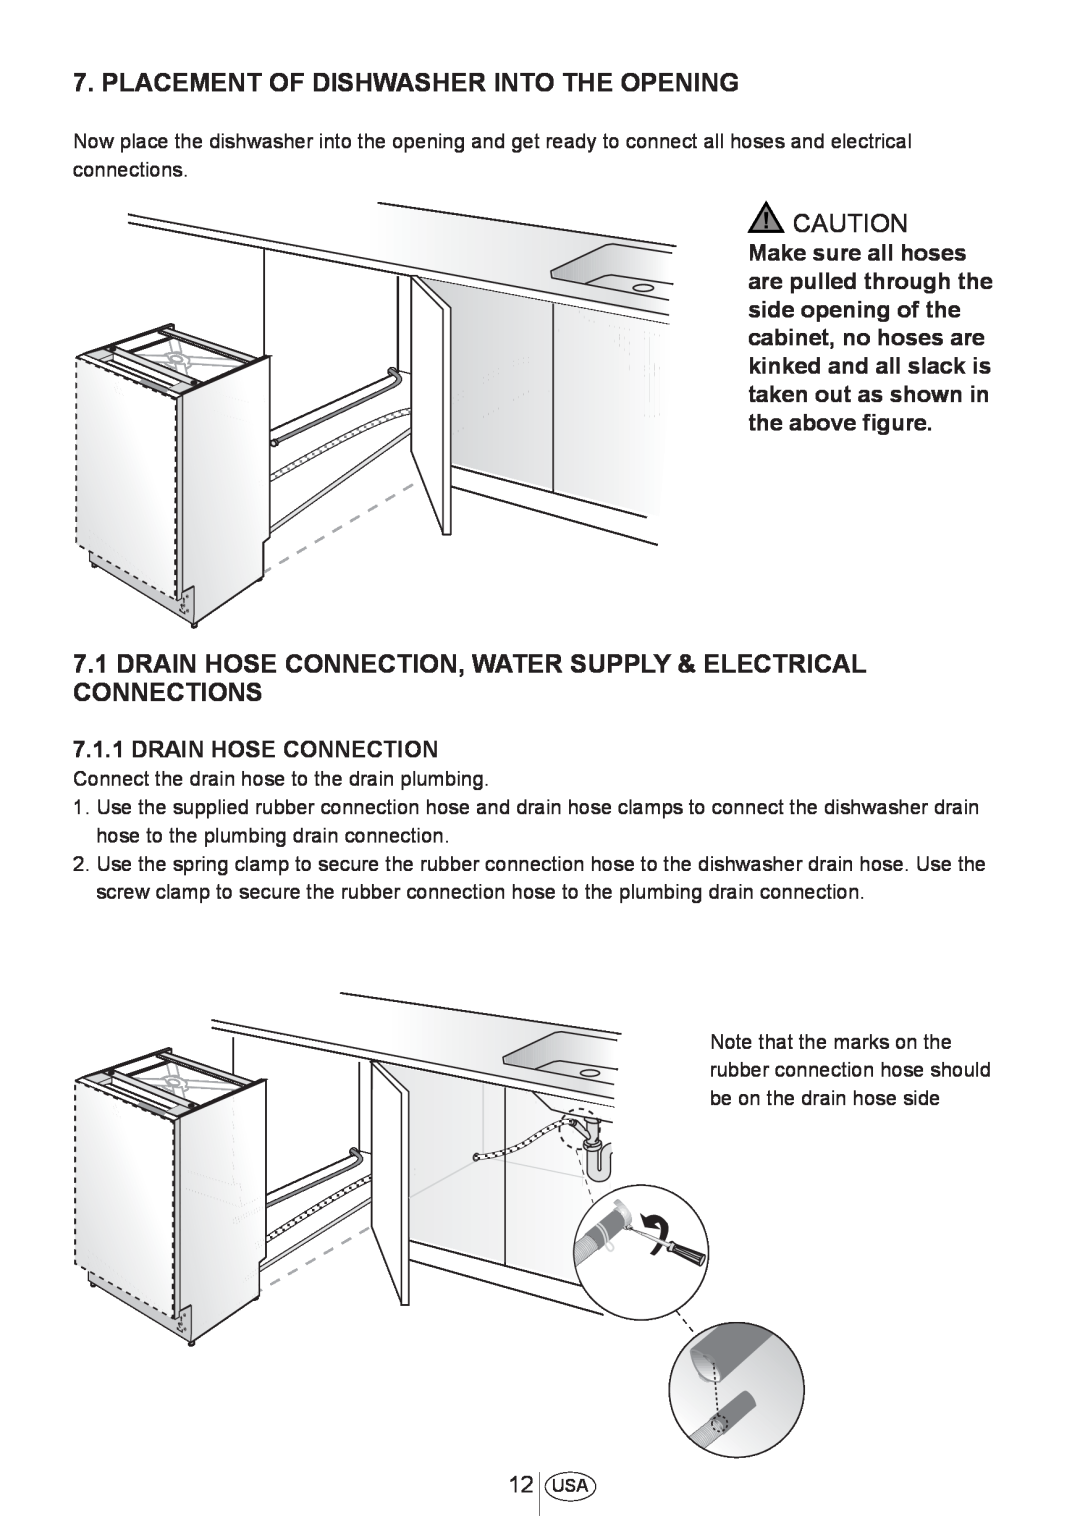 Blomberg DWS 54100 FBI, DWS 54100 SS installation manual Placement Of Dishwasher Into The Opening, Drain Hose Connection 